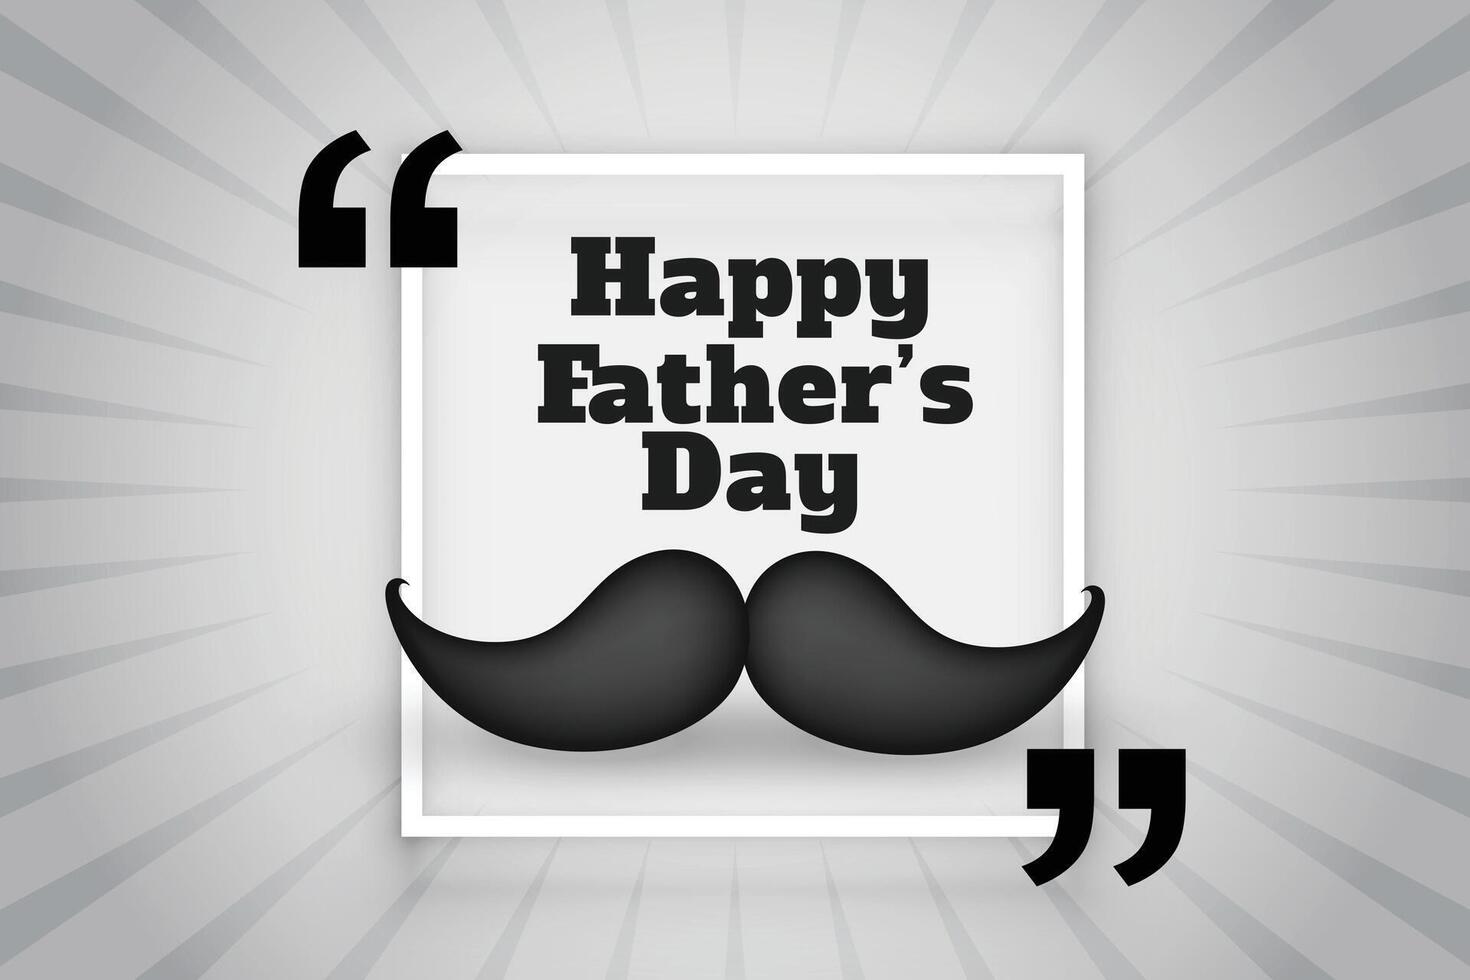 happy fathers day wishes card with 3d mostache vector